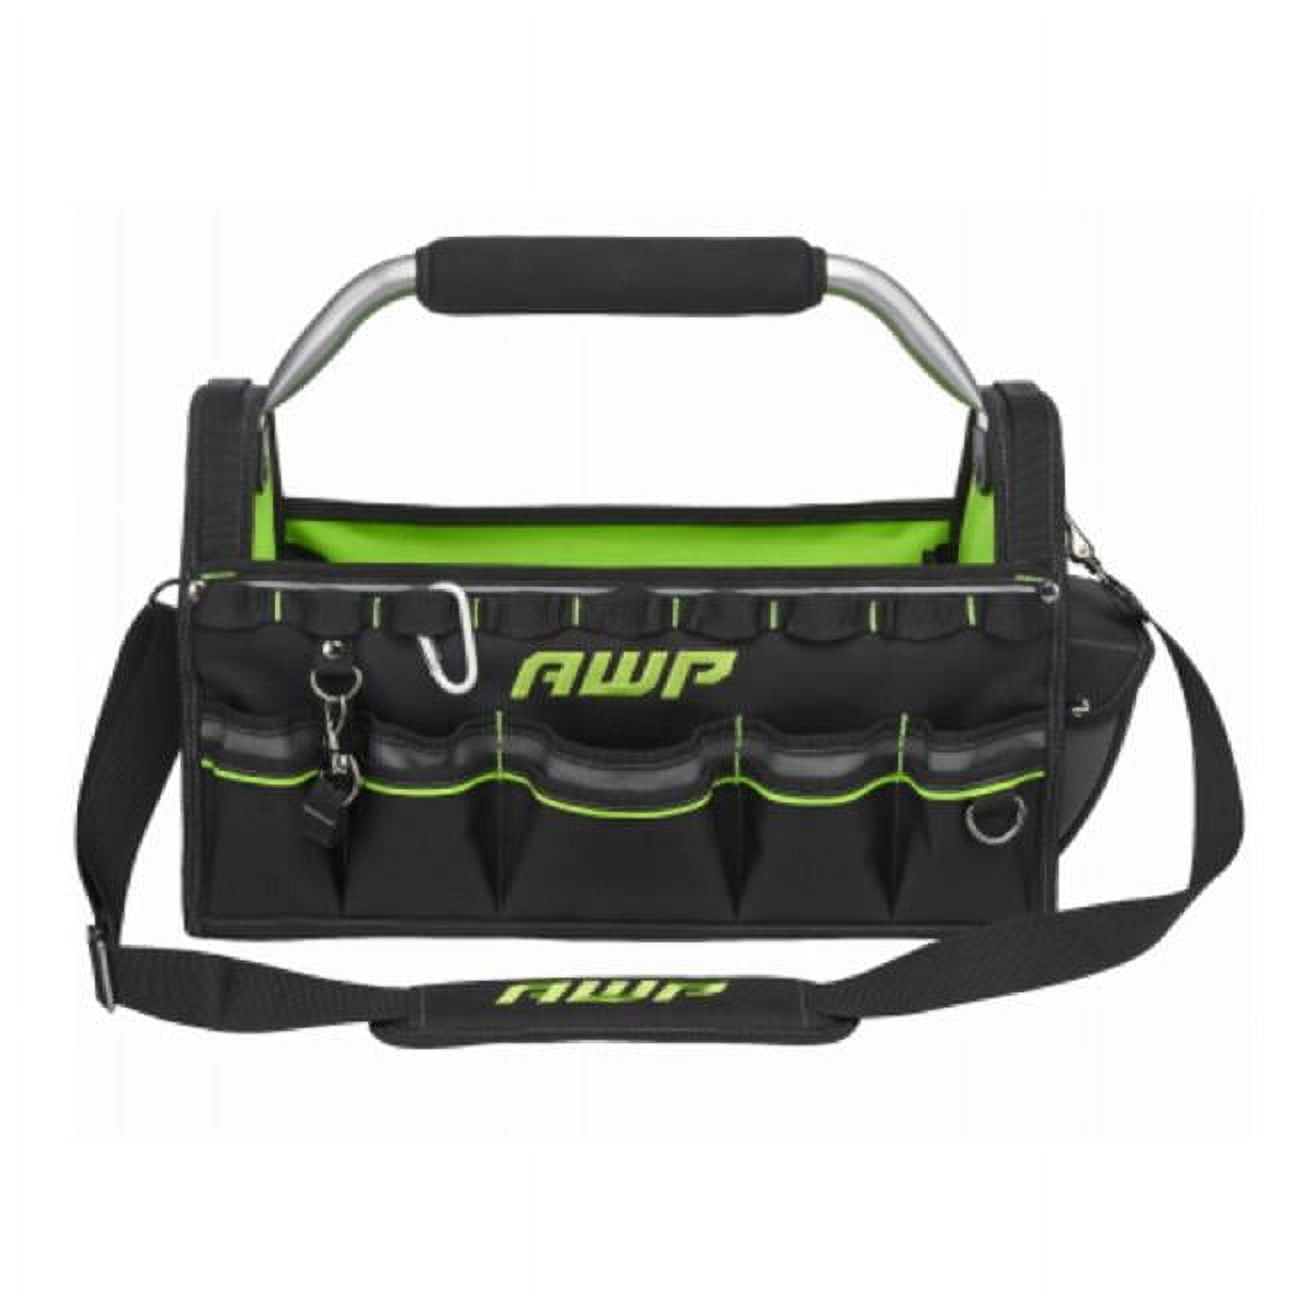 Big Time Products 18 in. AWP Pro Tool Tote Bag - Walmart.com